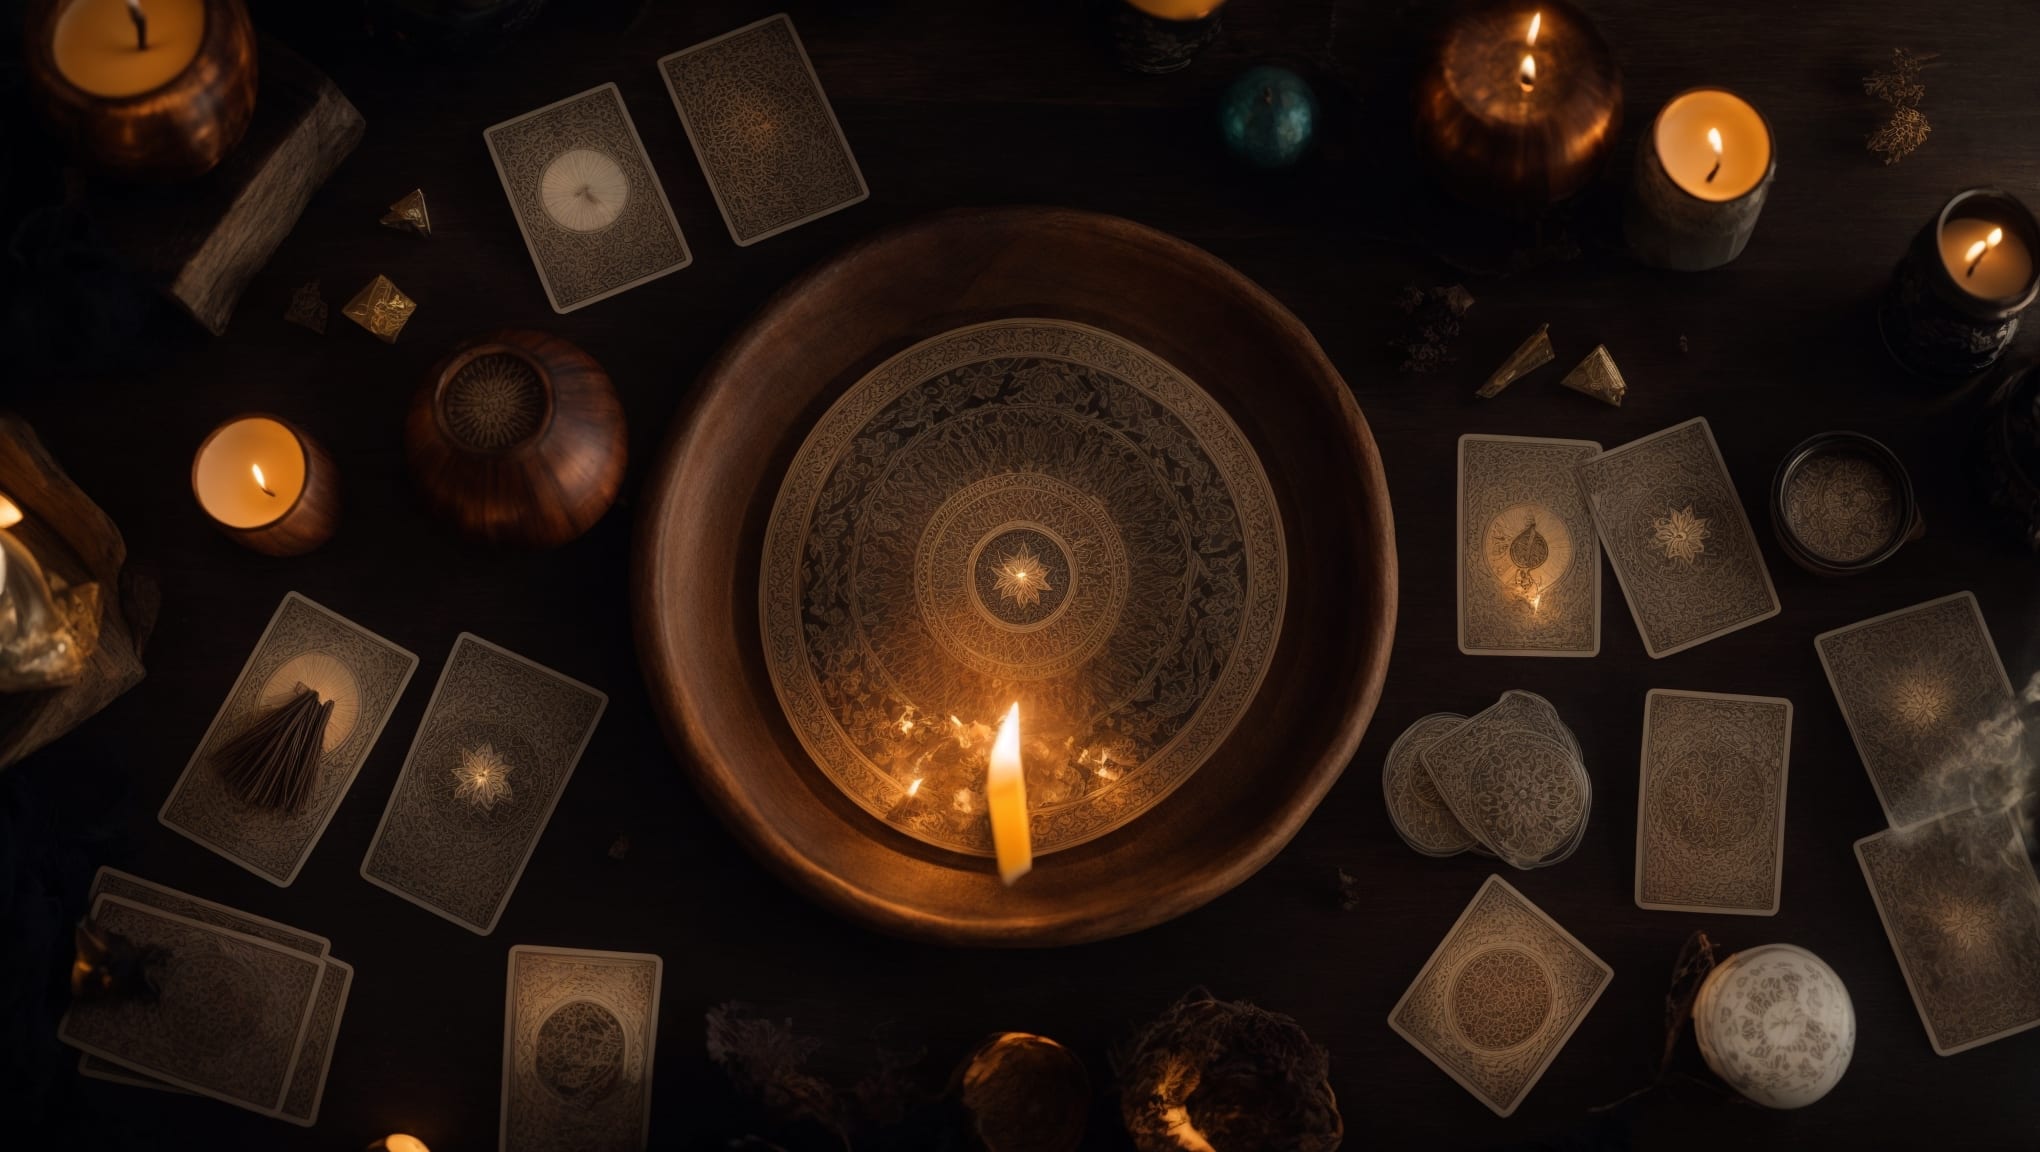 An overhead view of 15 detailed tarot cards on a table, hinting at understanding tarot card meanings, with a candle and crystal ball in the back.